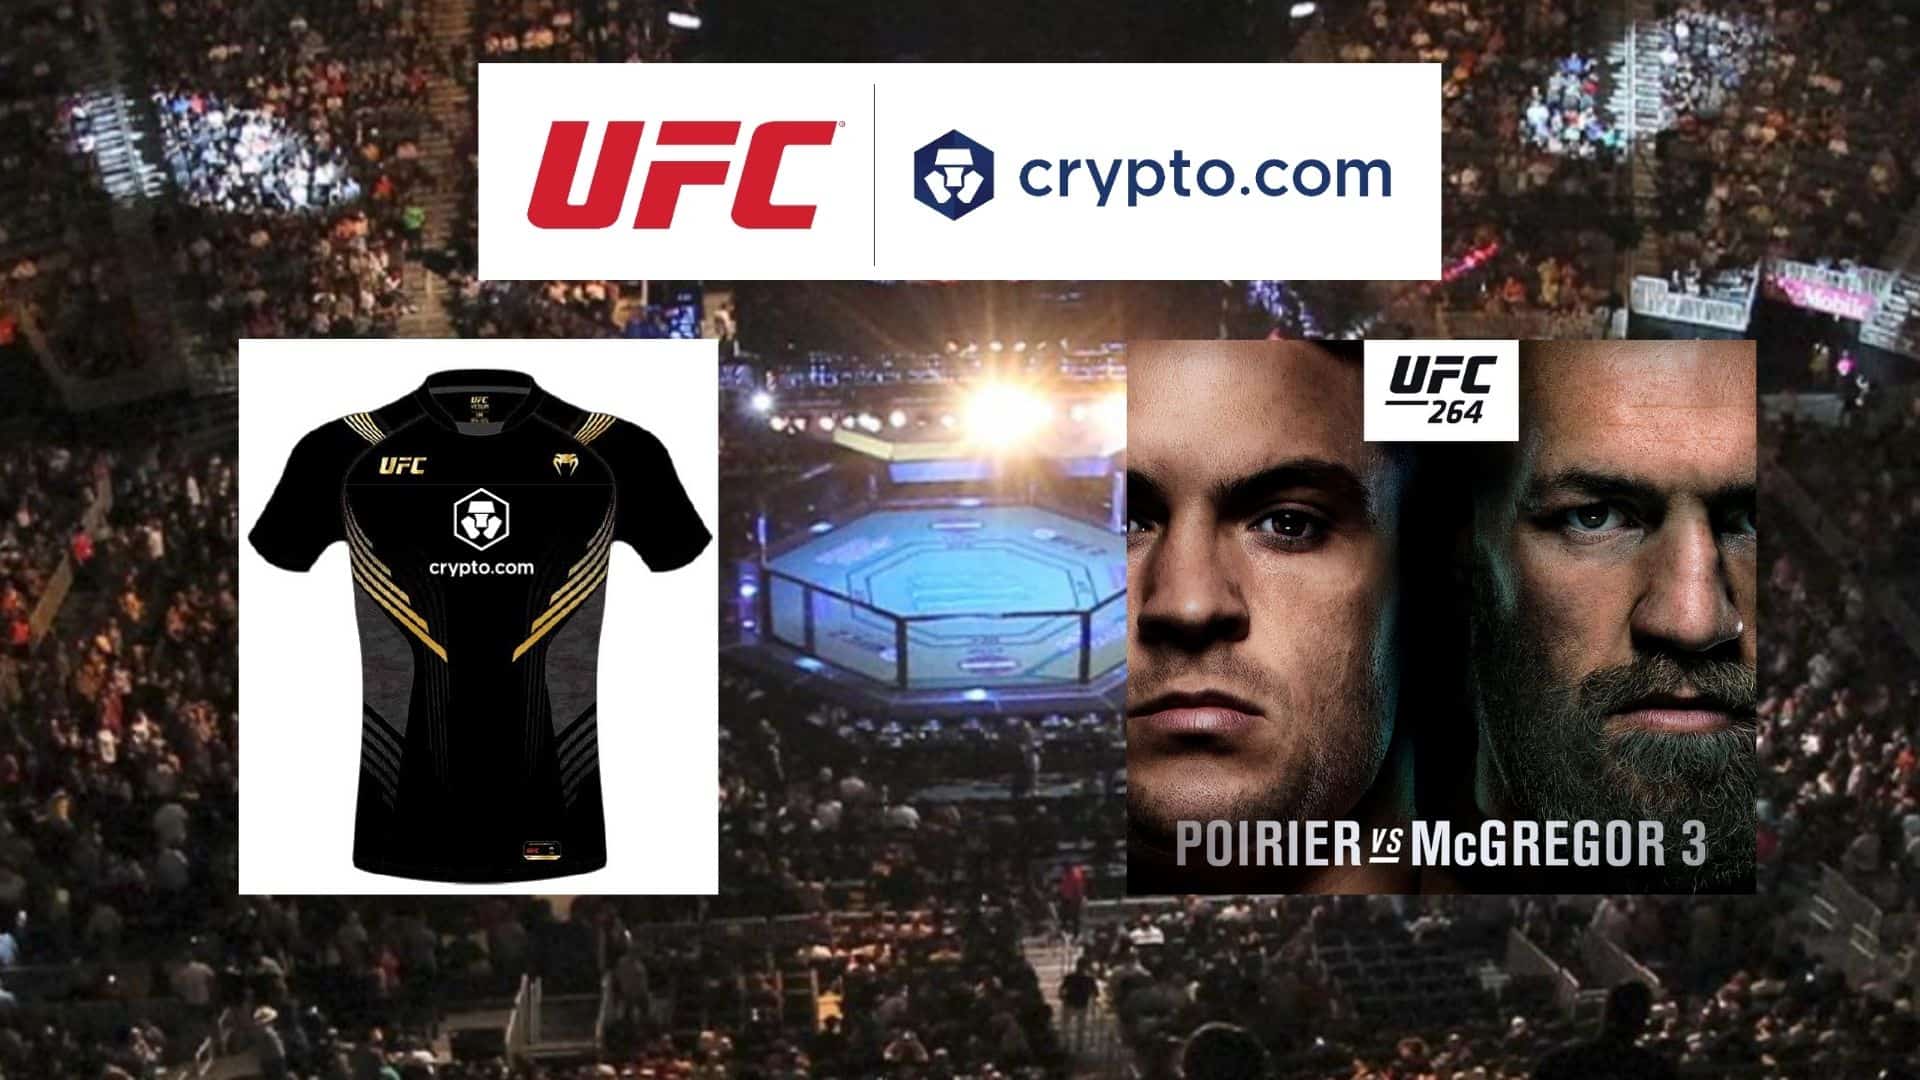 Ufc cryptocurrency will ethereum rise again